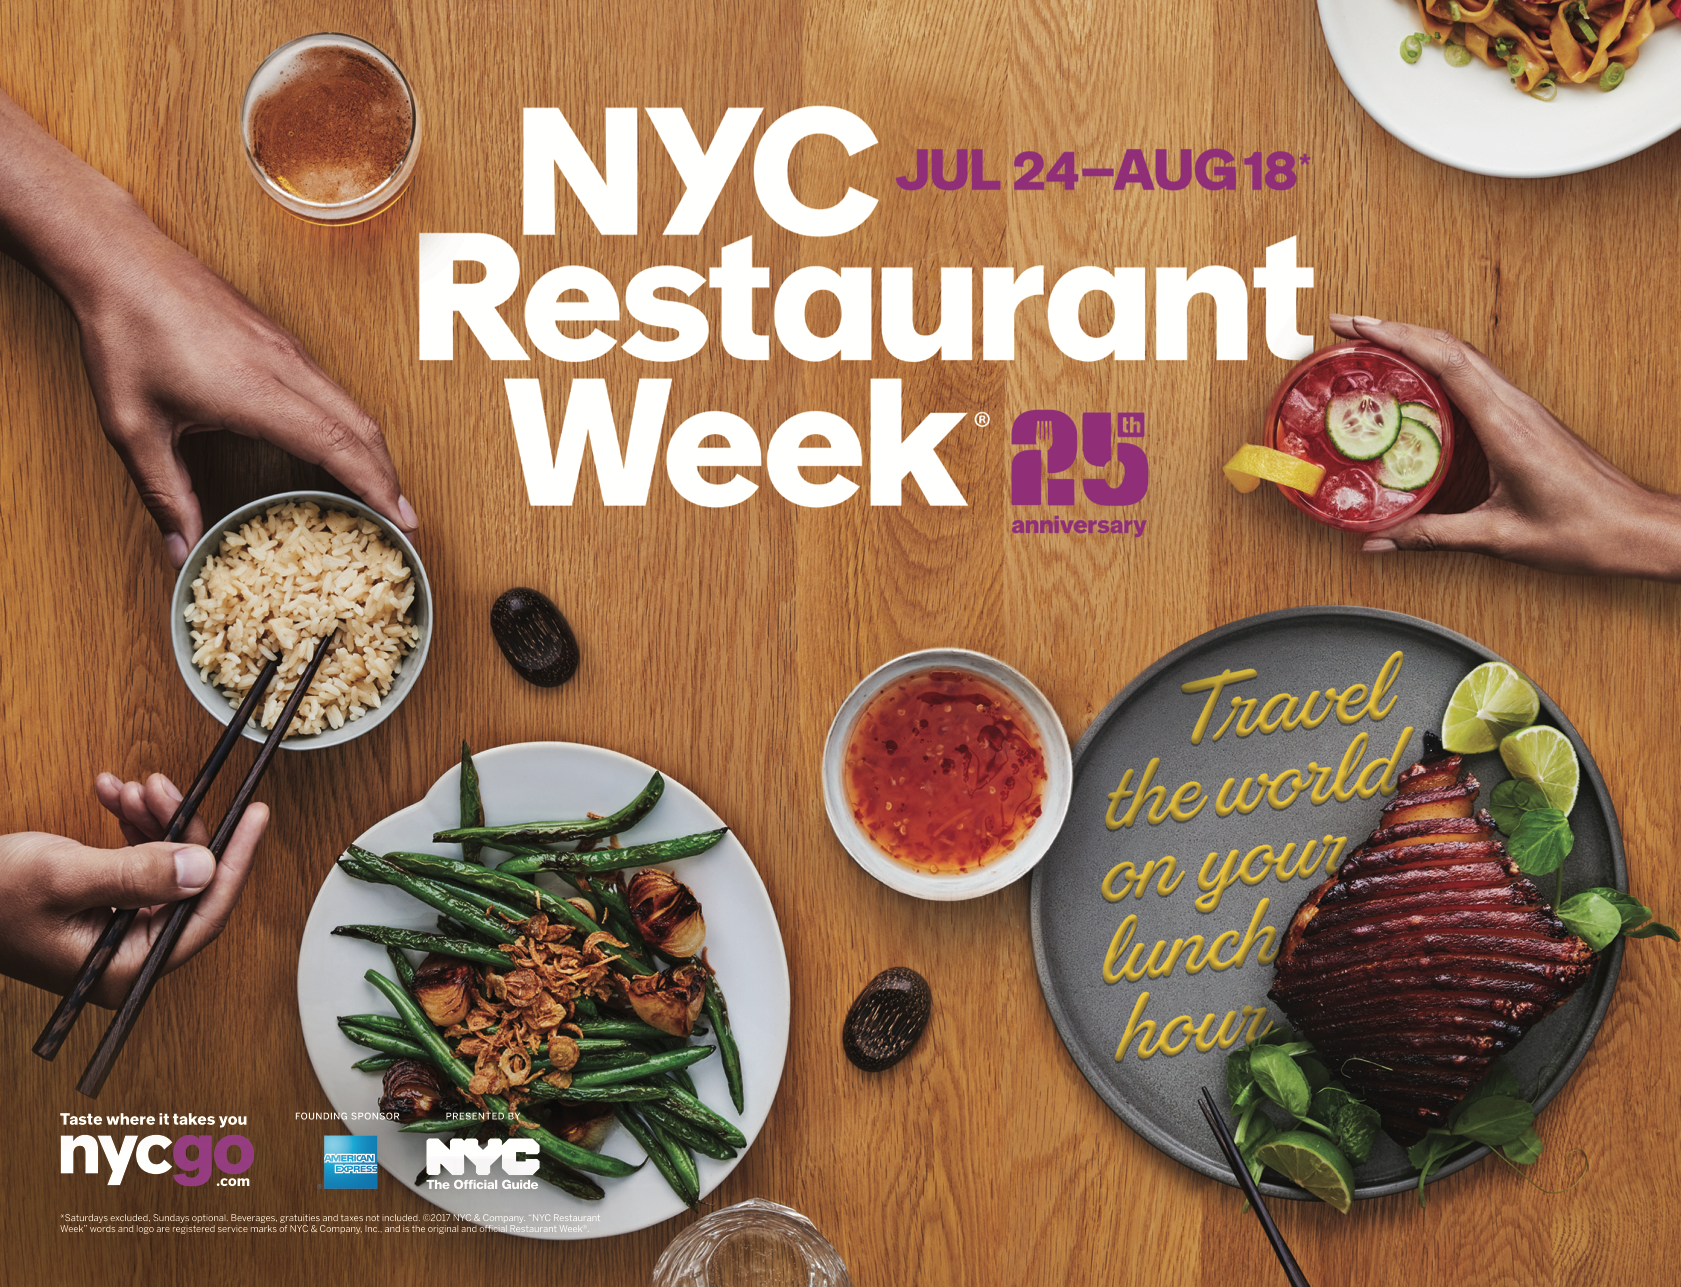 NYC, it’s Time to Eat! Behind the New Design for NYC Restaurant Week